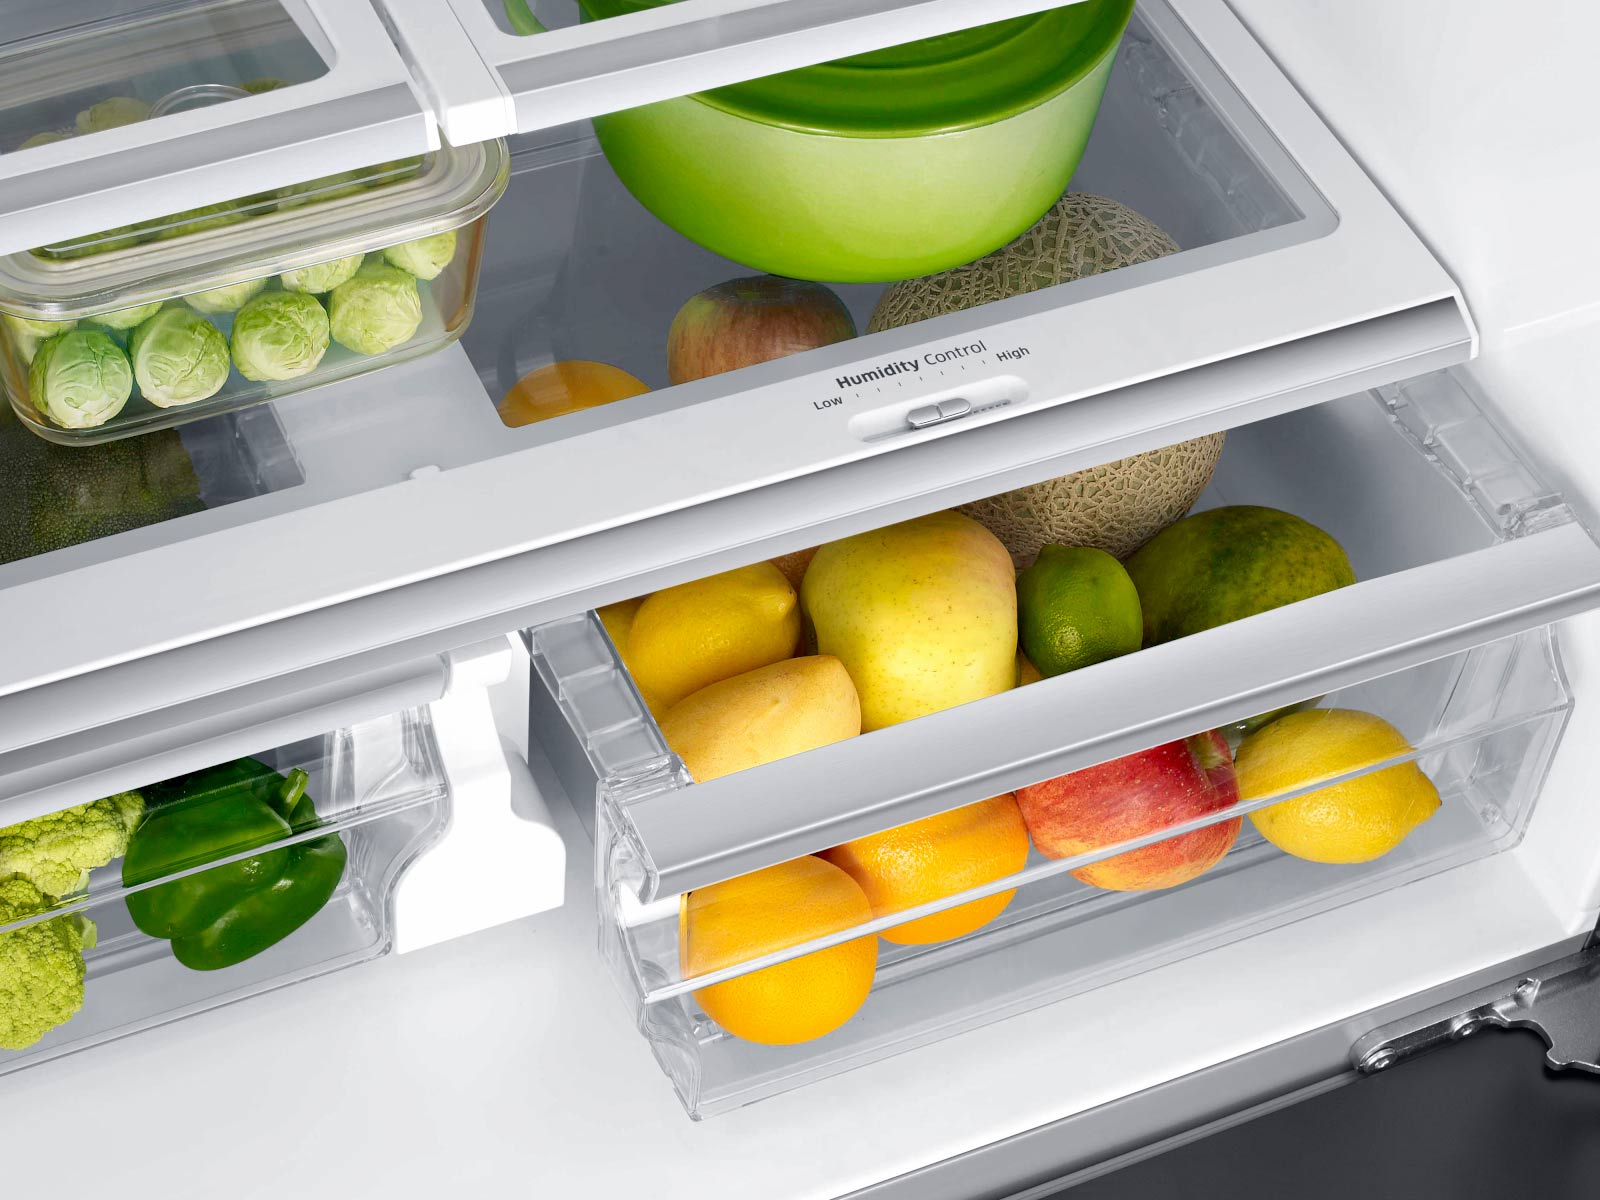 Thumbnail image of 23 cu. ft. Counter Depth 4-Door Flex™ Refrigerator with FlexZone™ in Stainless Steel